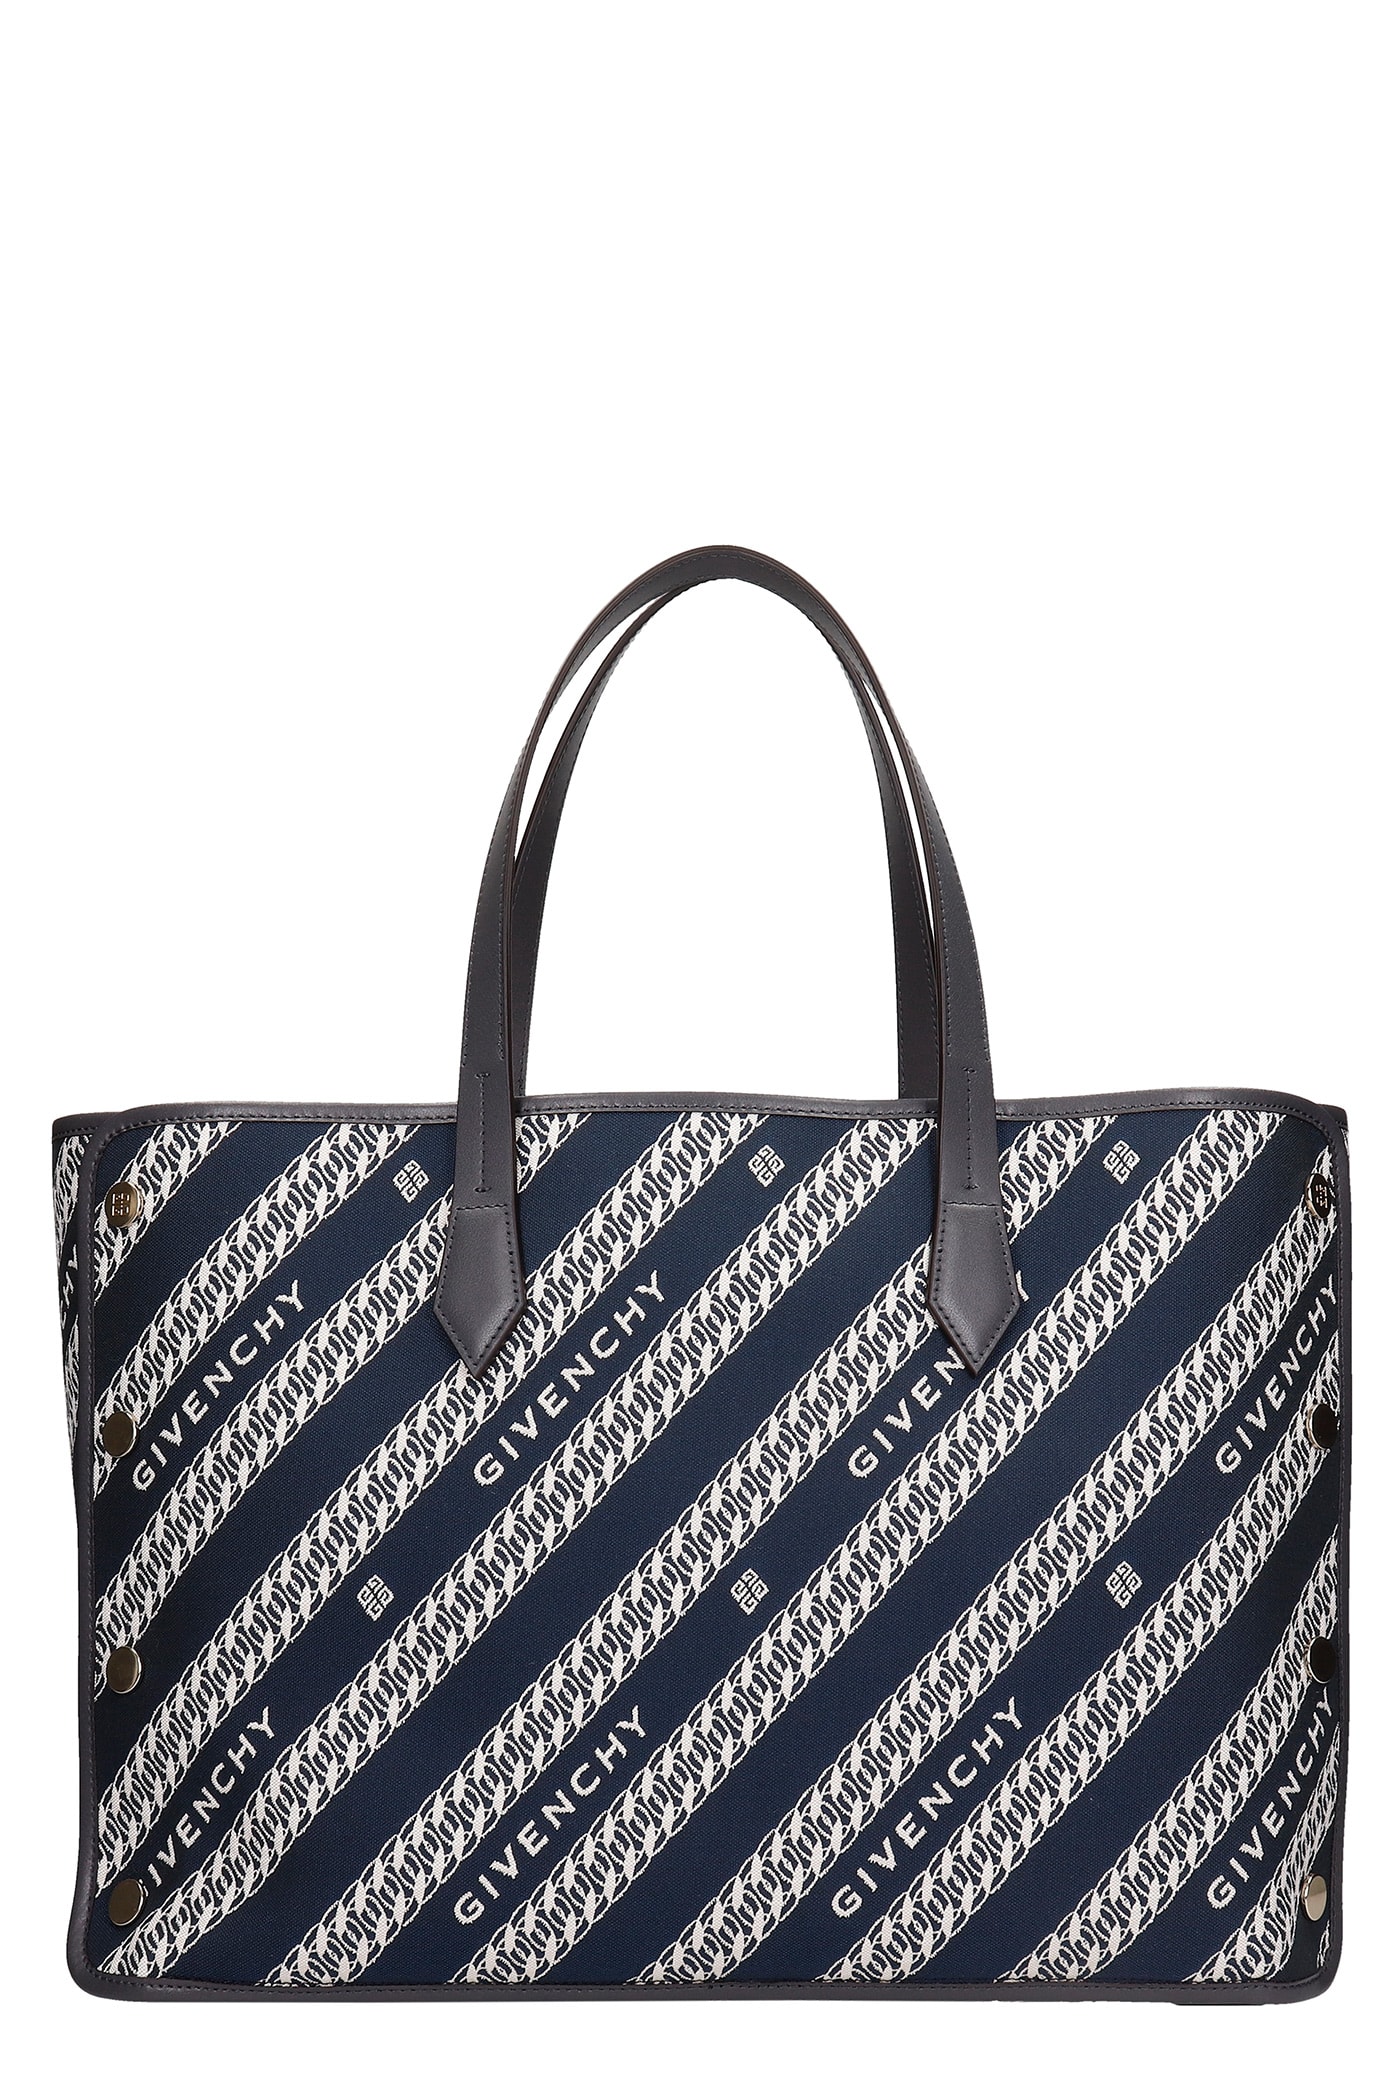 Givenchy Bond Tote In Blue Cotton